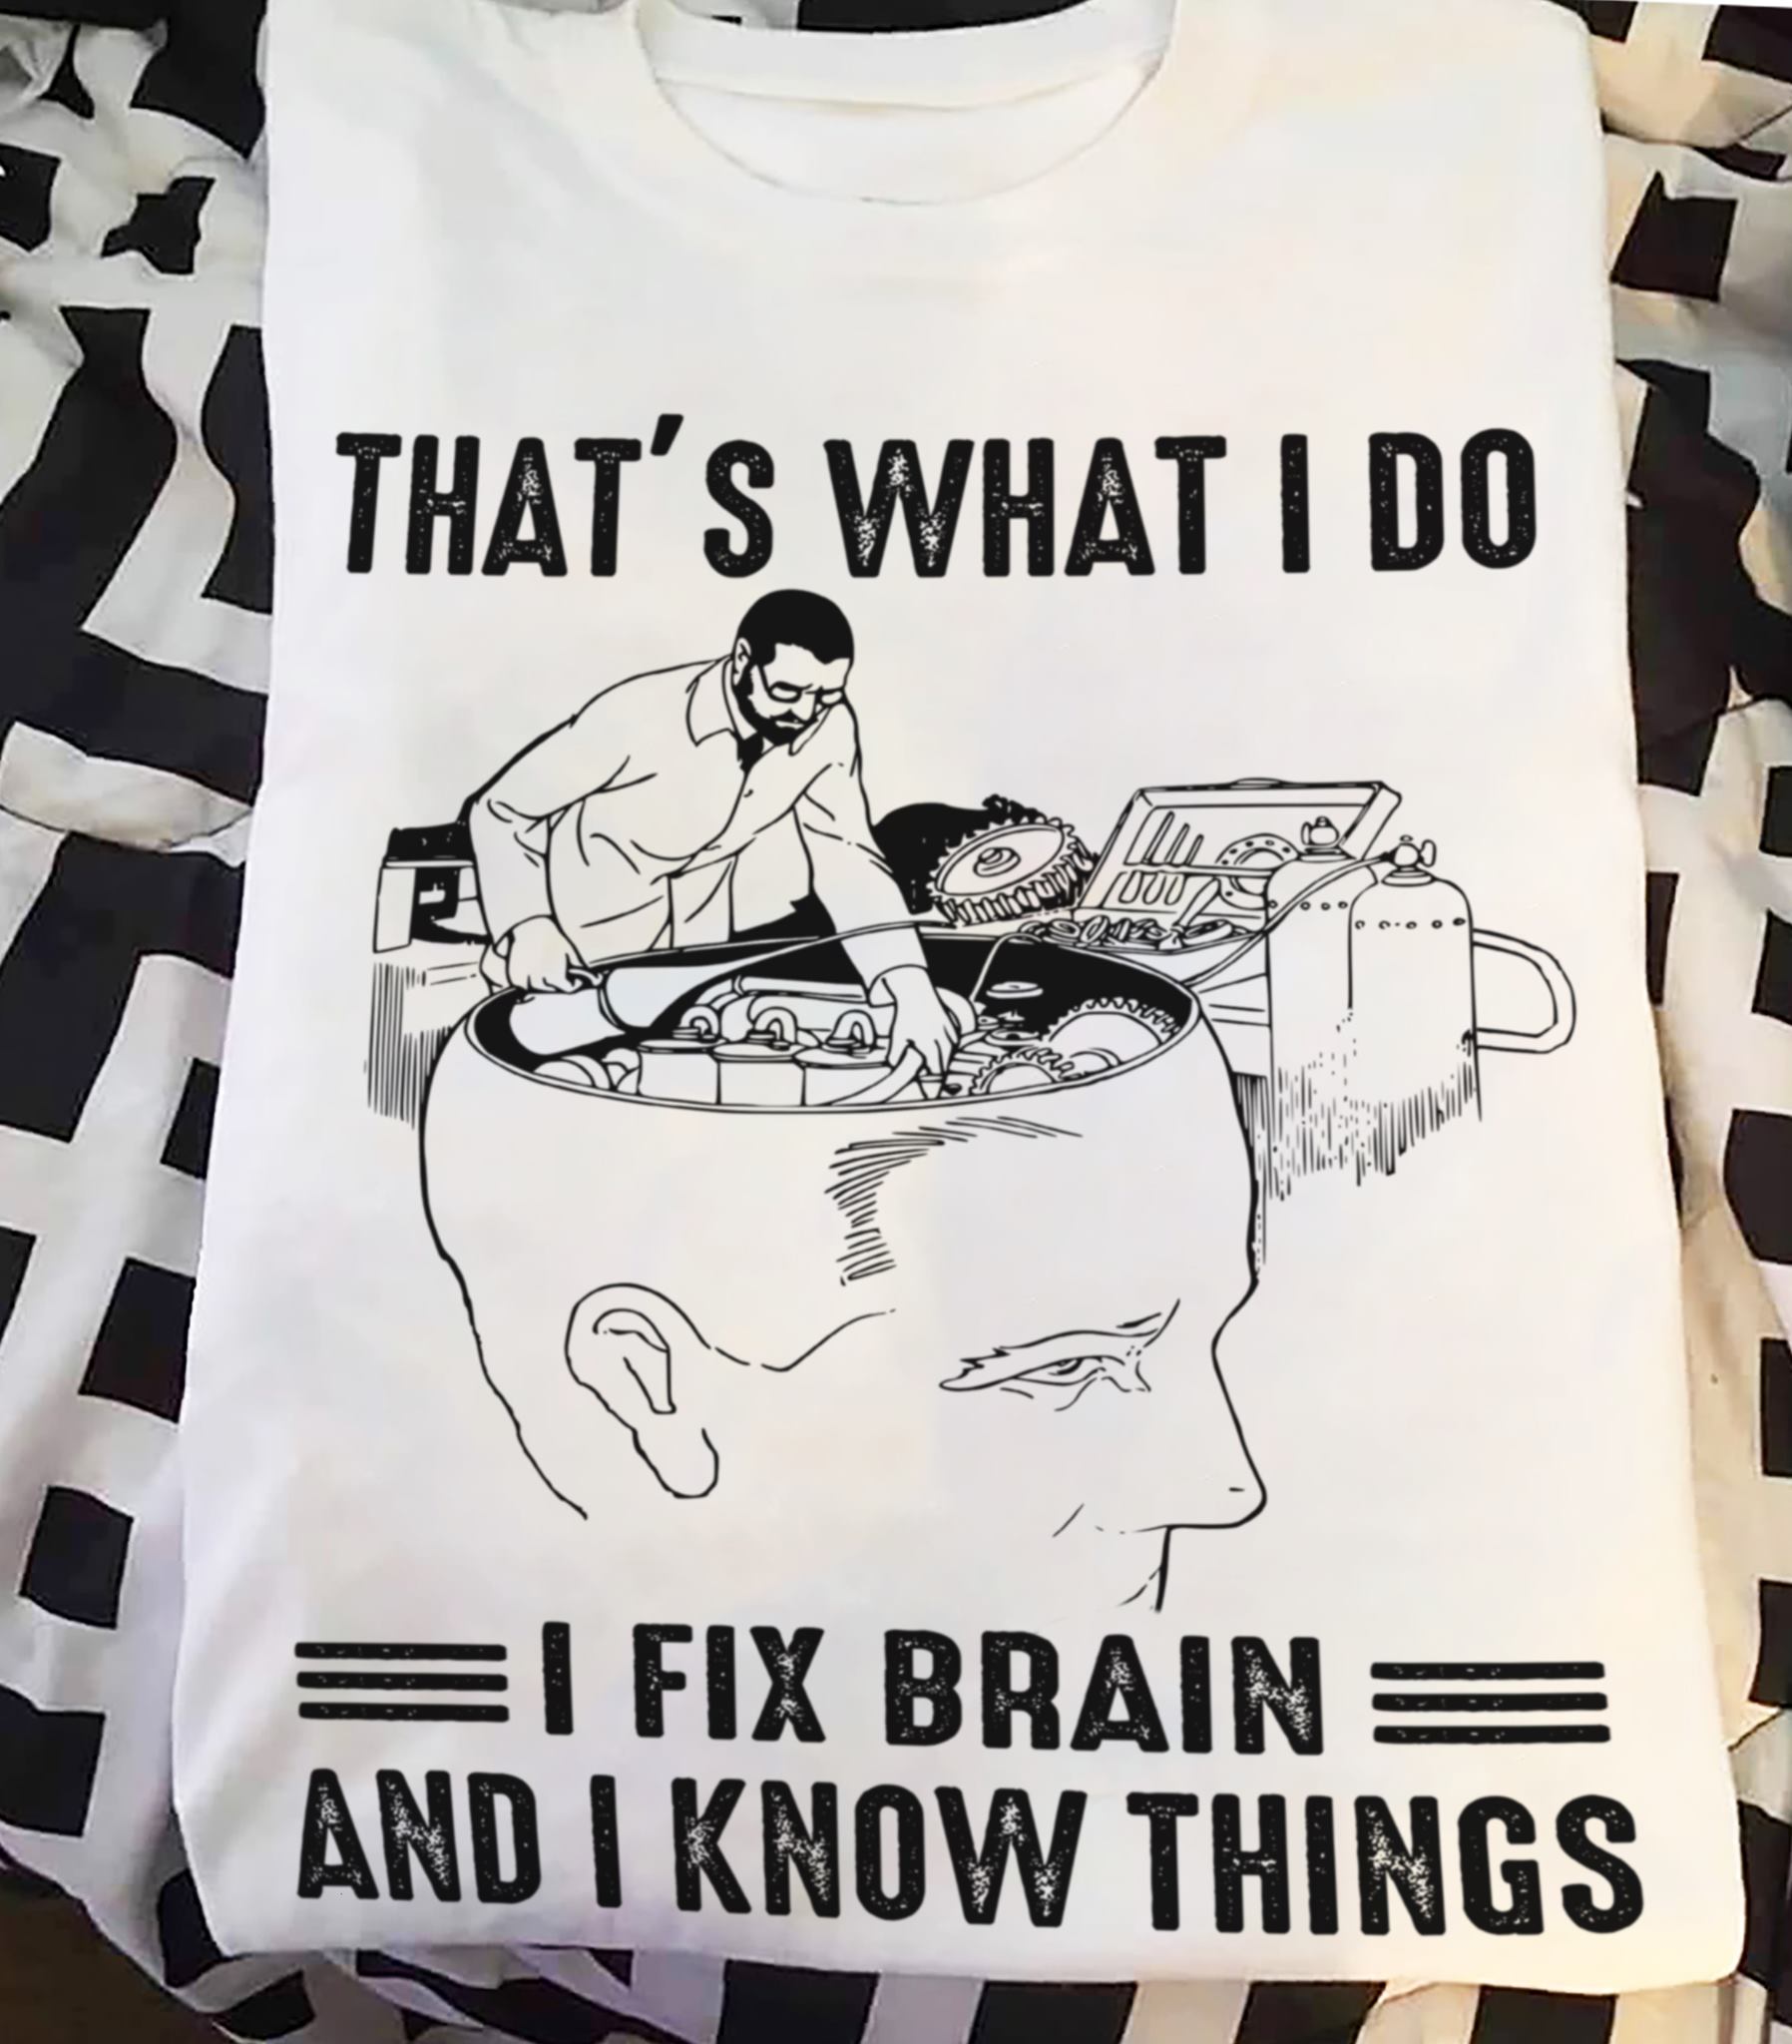 That's what I do I fix brain and I know things - Fix brain, doctor the job